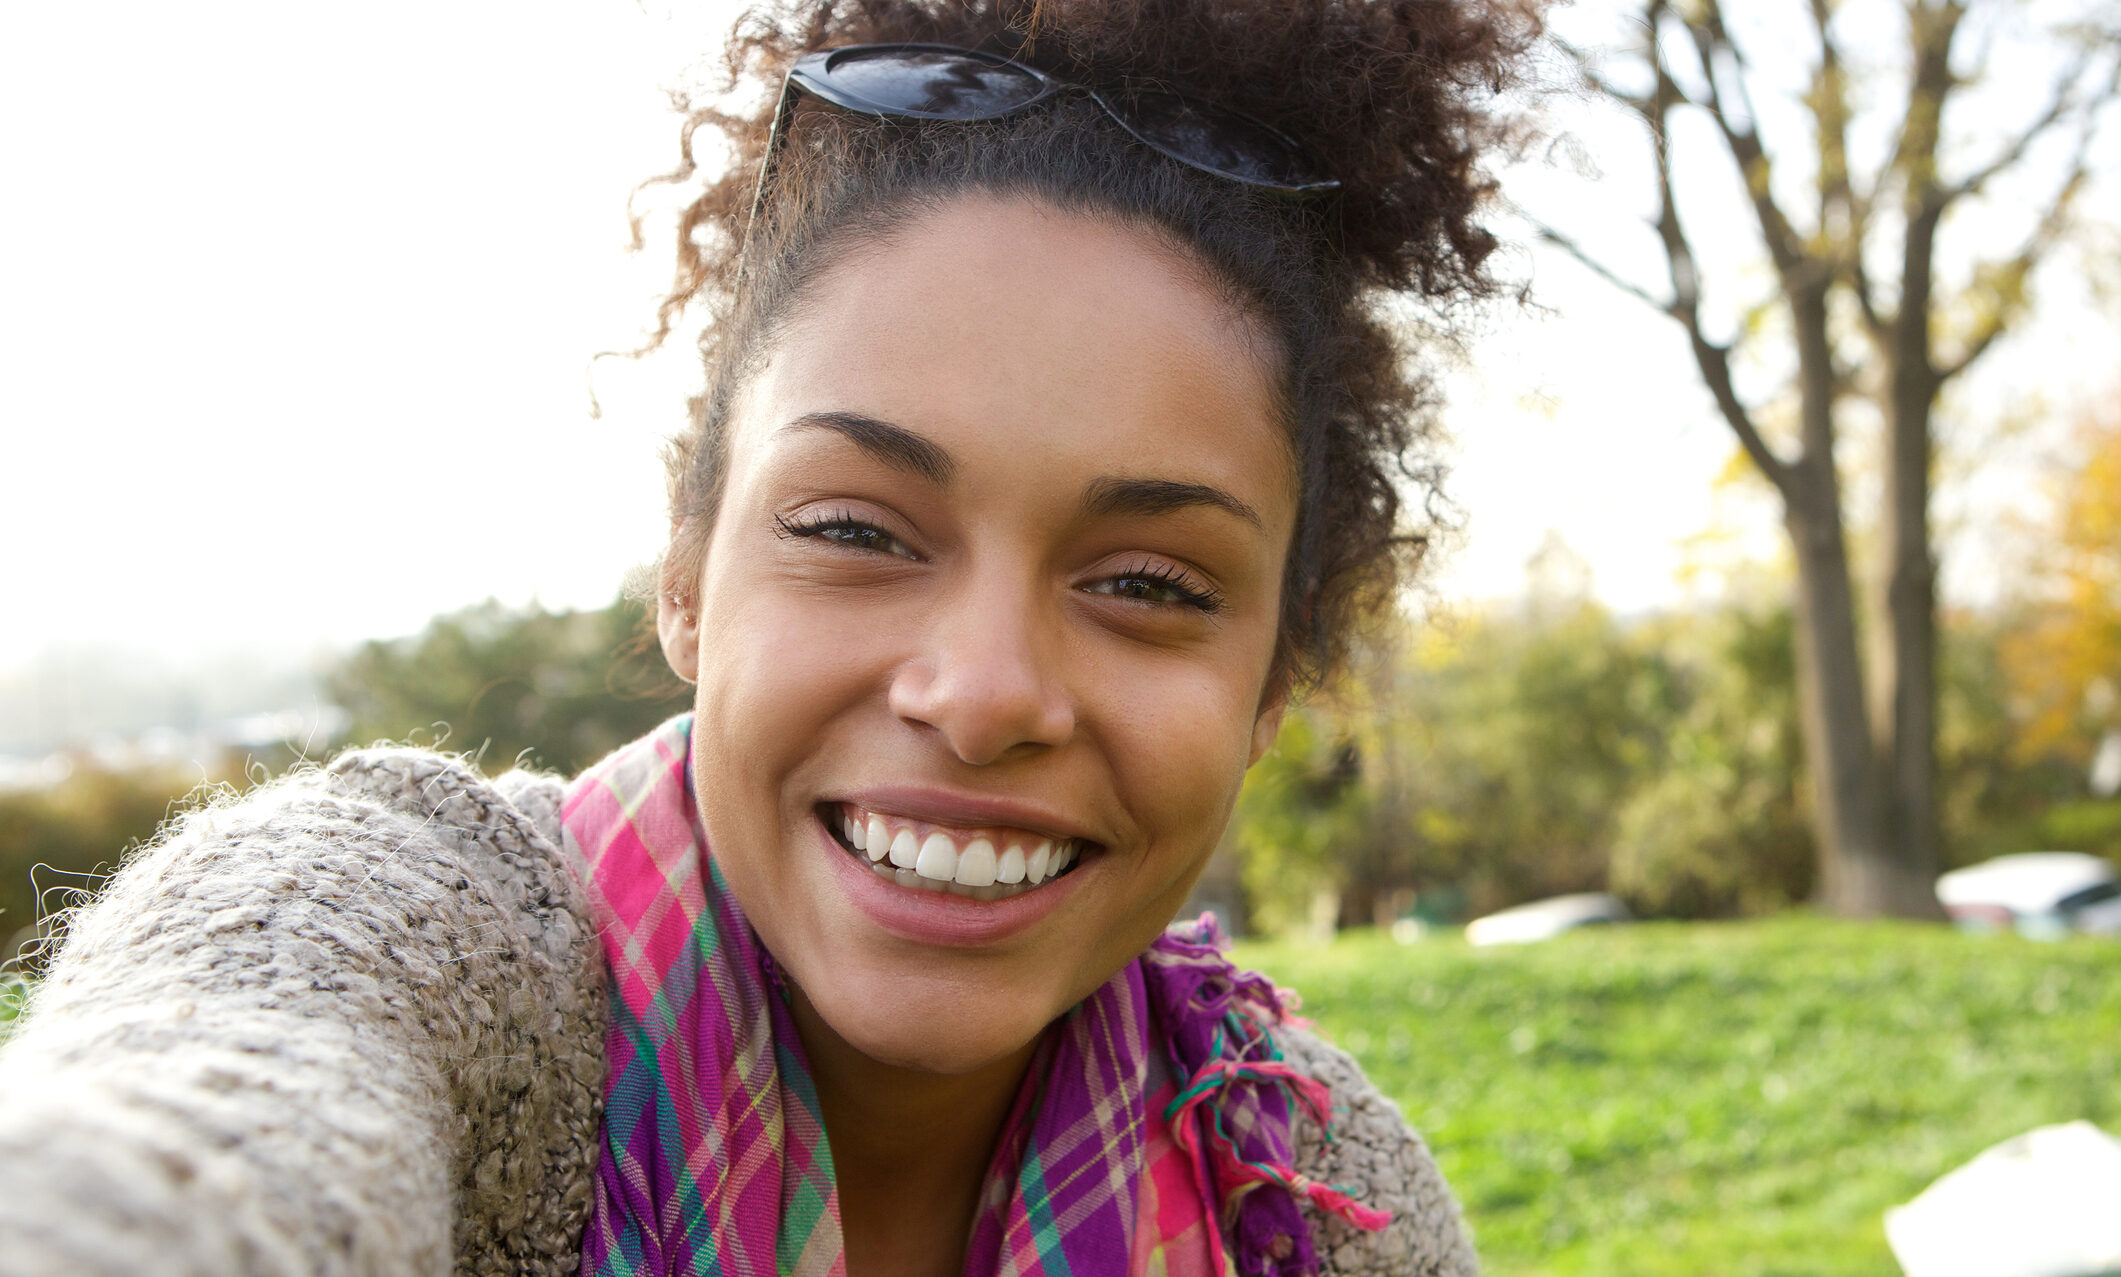 Selfie portrait of a smiling young Black woman happy to be outdoors